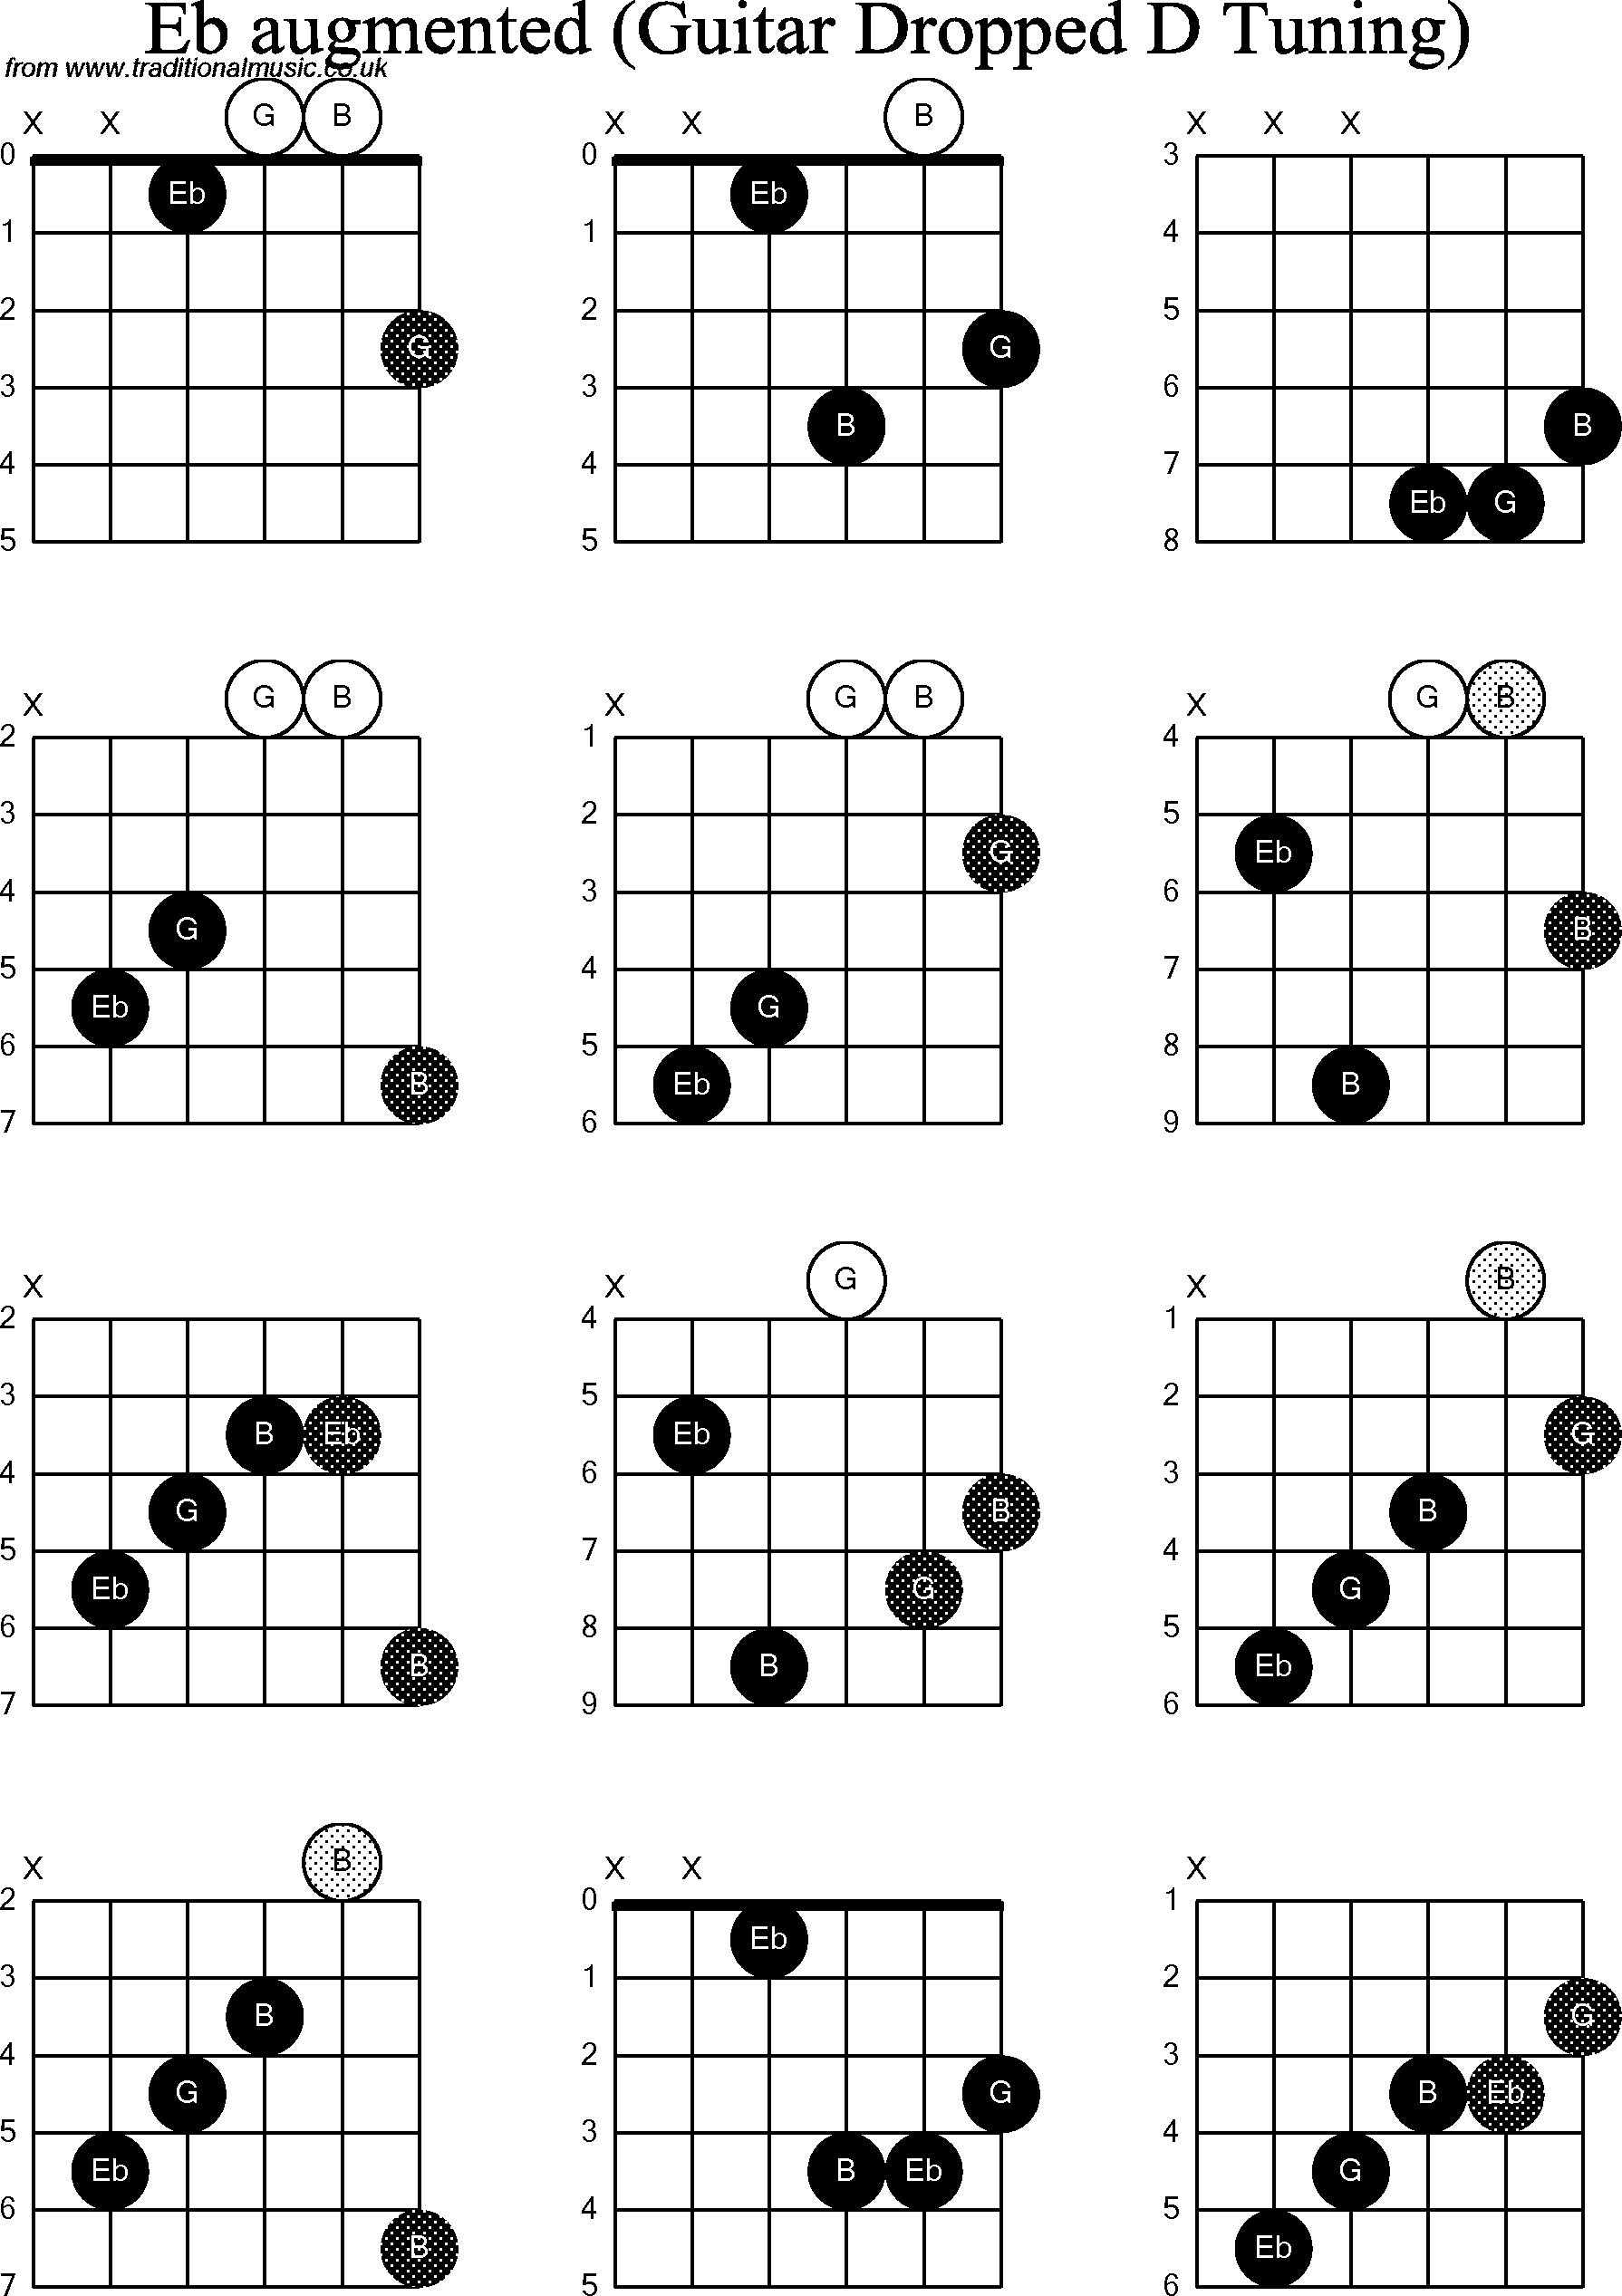 Chord diagrams for dropped D Guitar(DADGBE), Eb Augmented